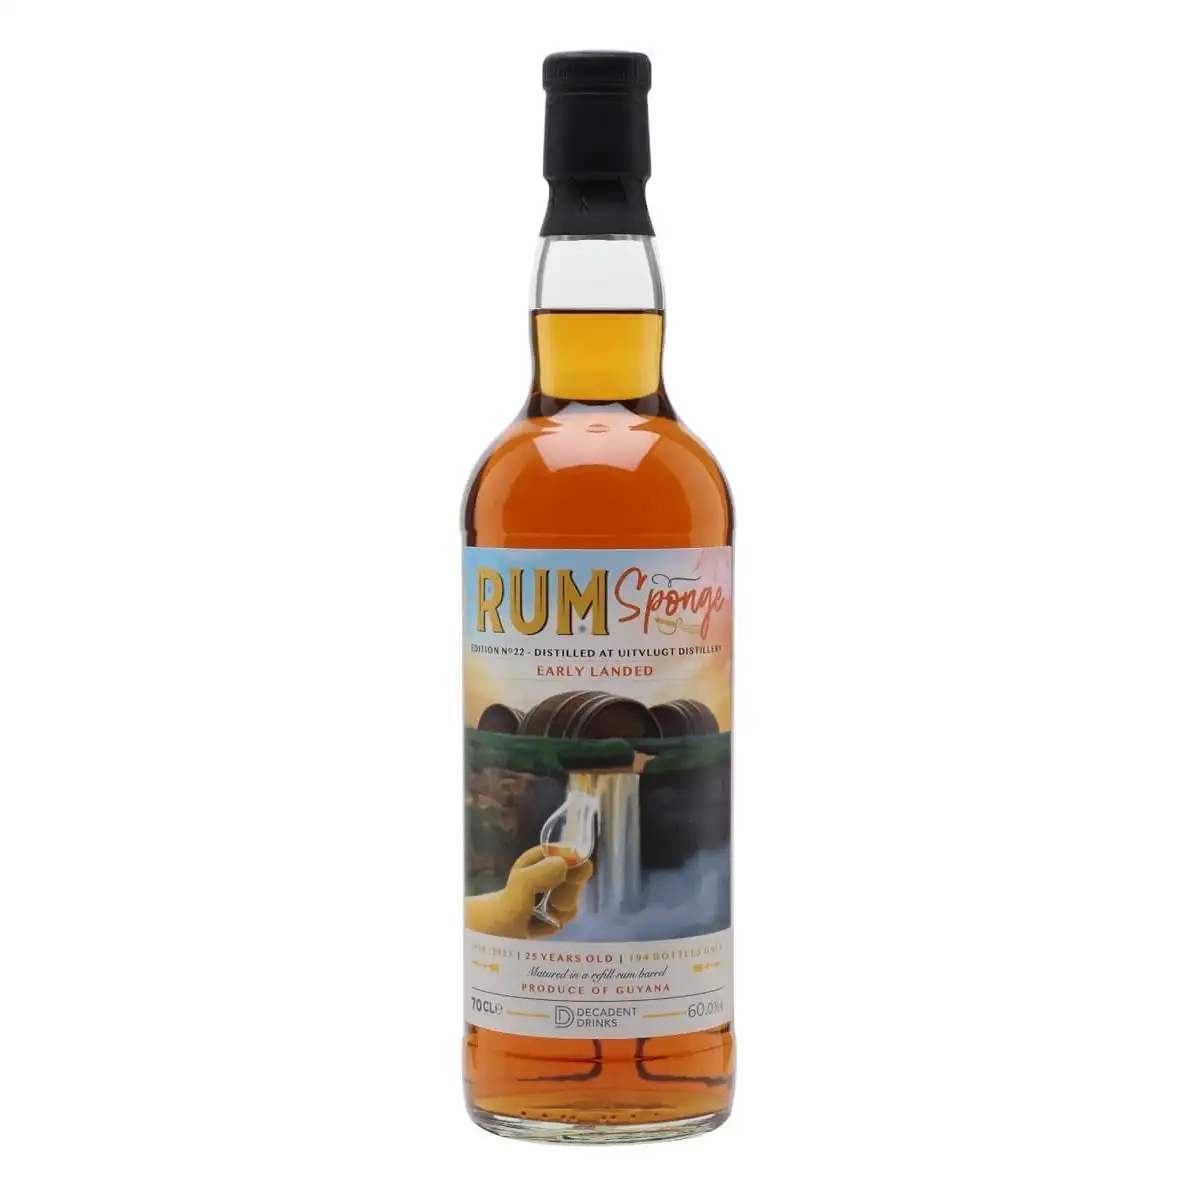 Image of the front of the bottle of the rum Rum Sponge No. 22